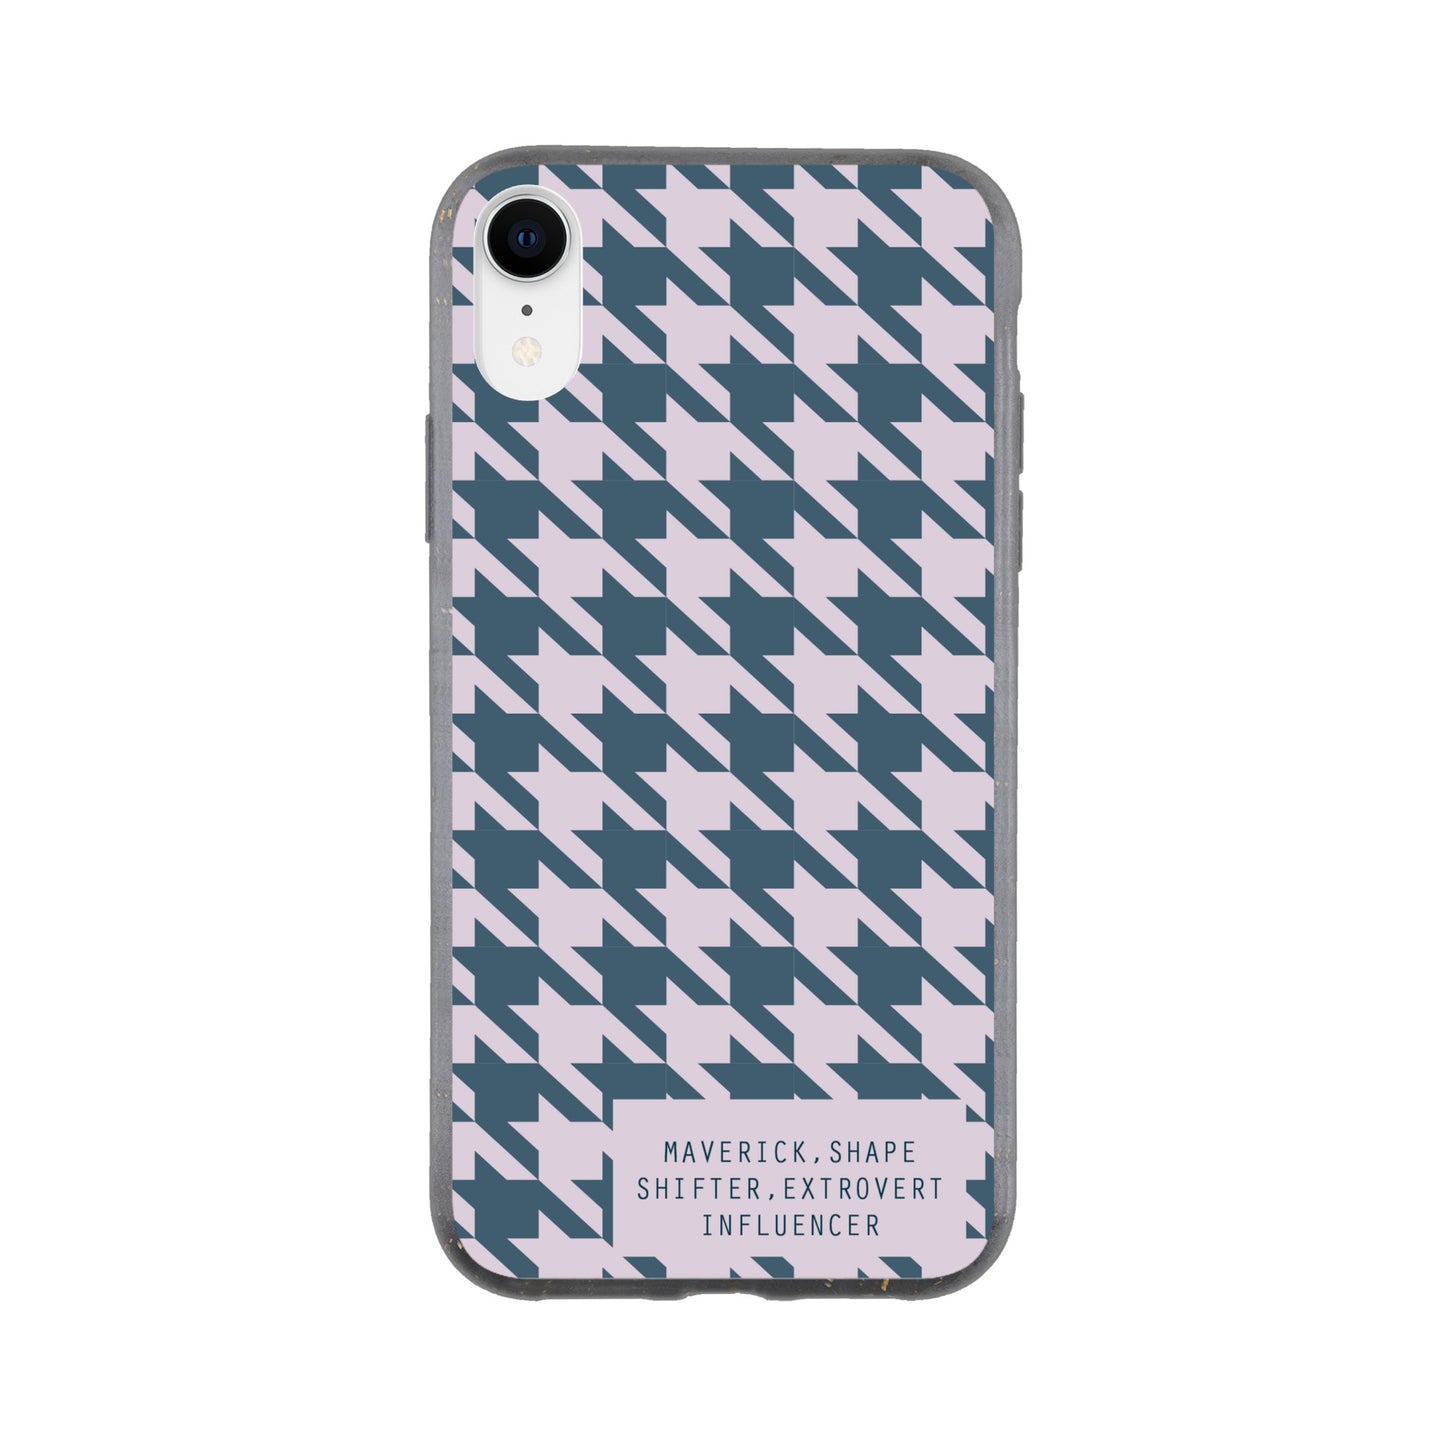 Biodegradable phone case with houndstooth print